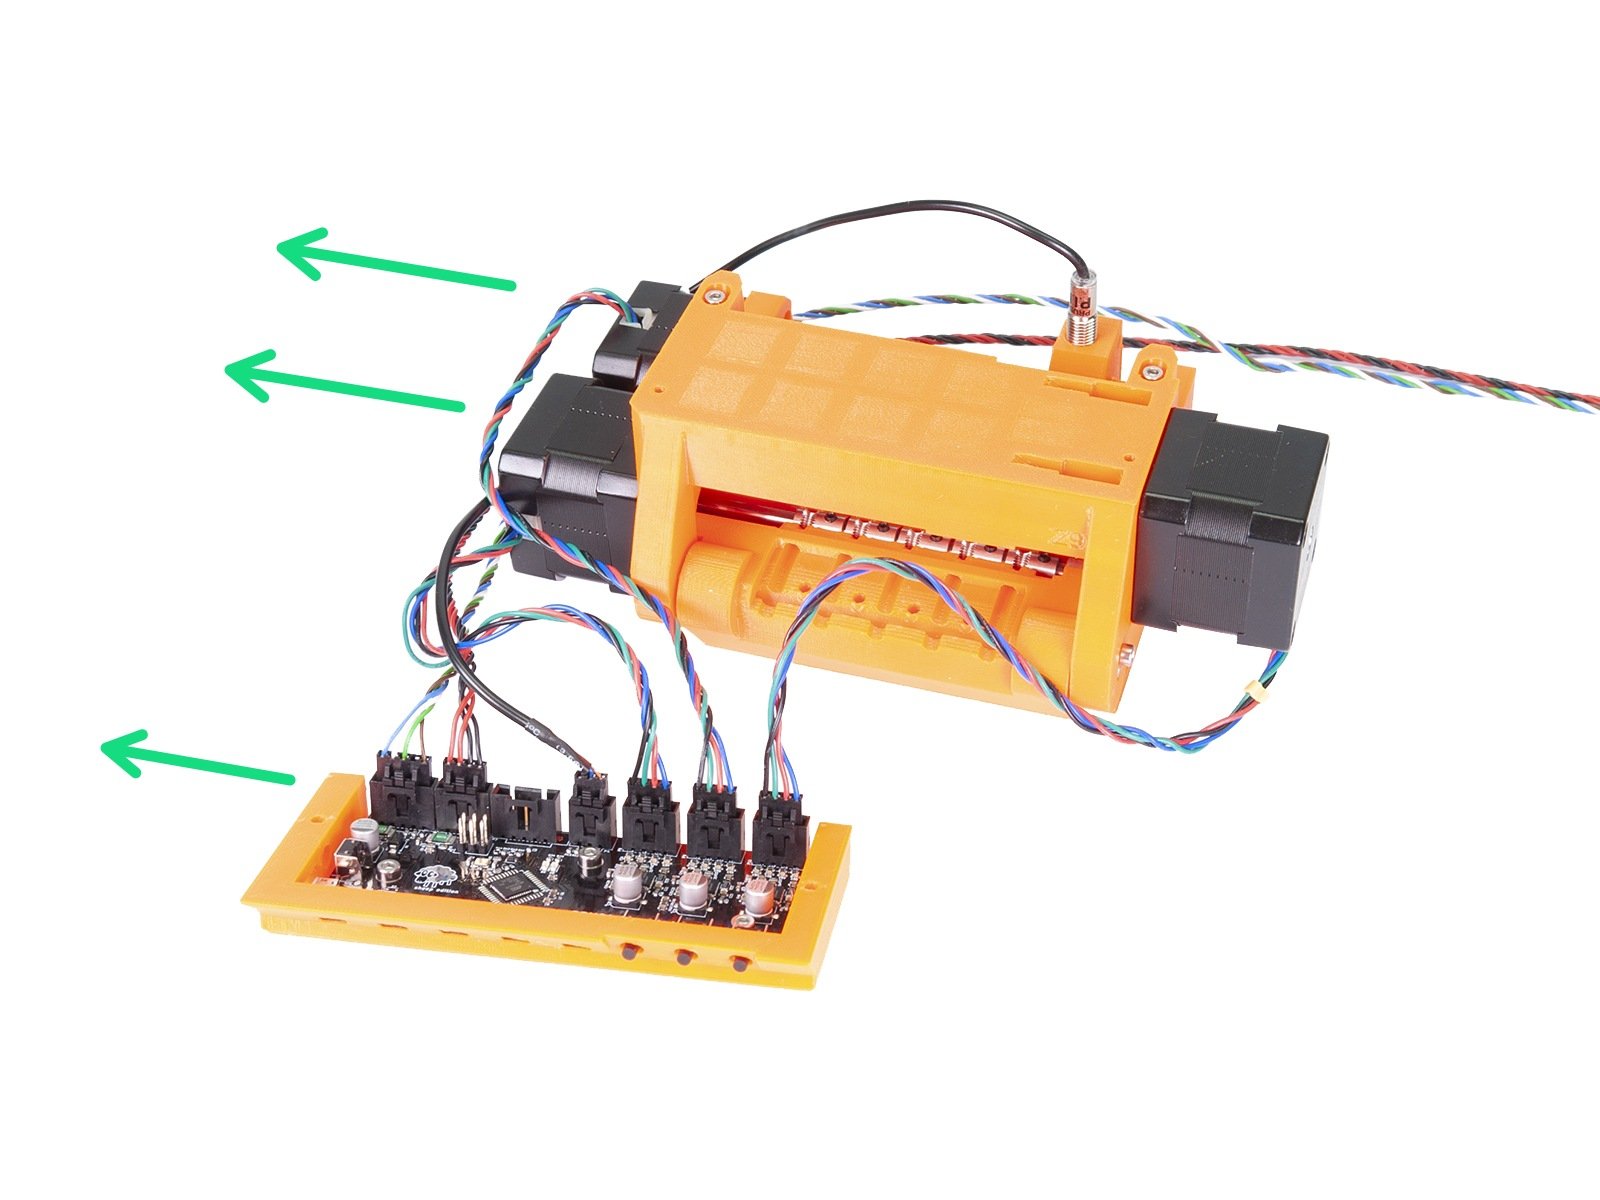 PC/タブレット PC周辺機器 6. Electronics and MMU2S unit assembly | Prusa Knowledge Base